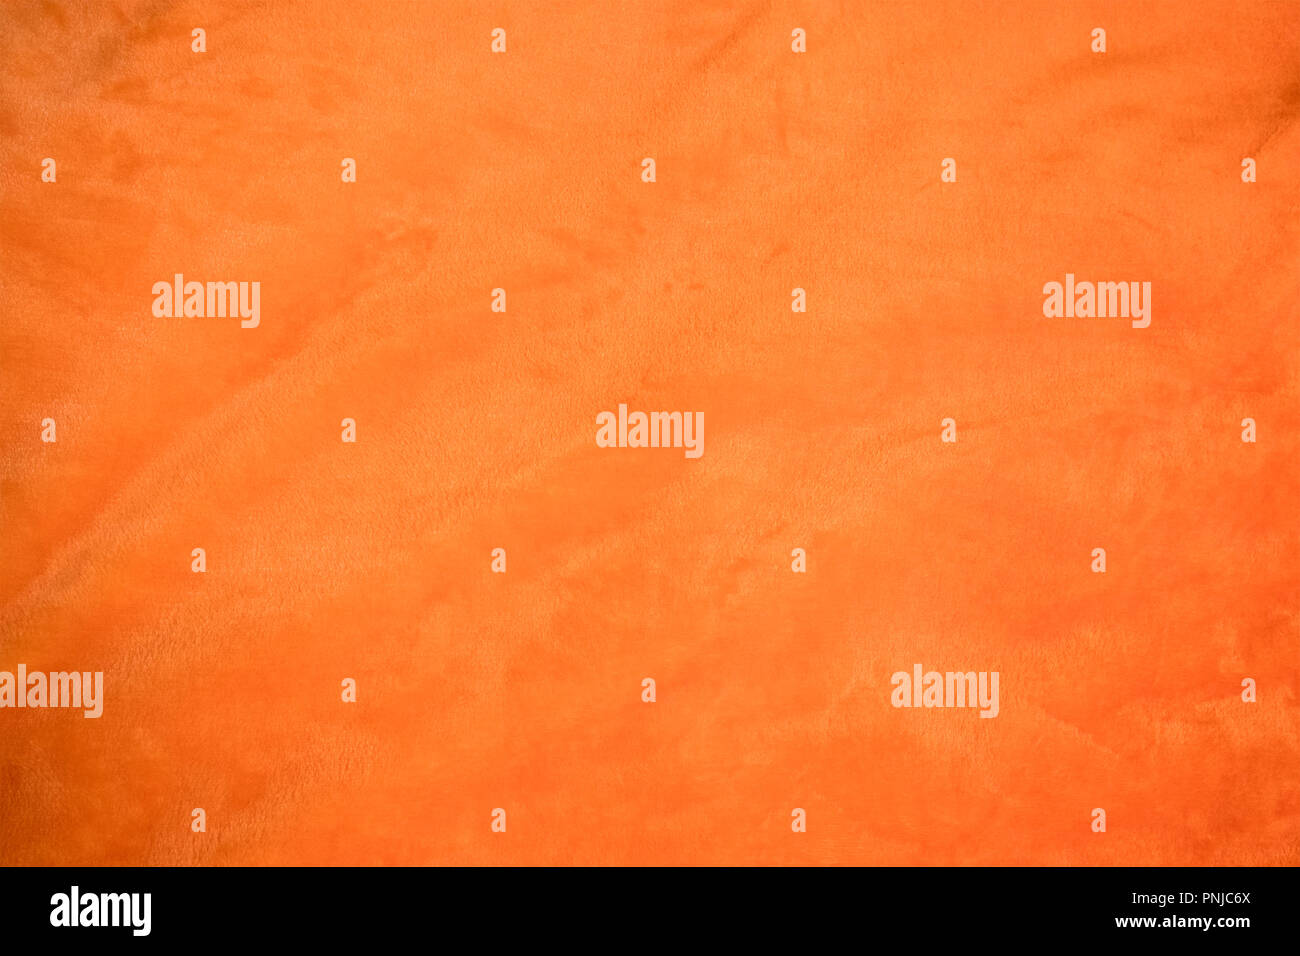 Jersey bright orange fabric with light folds closeup, may be used as background or texture Stock Photo